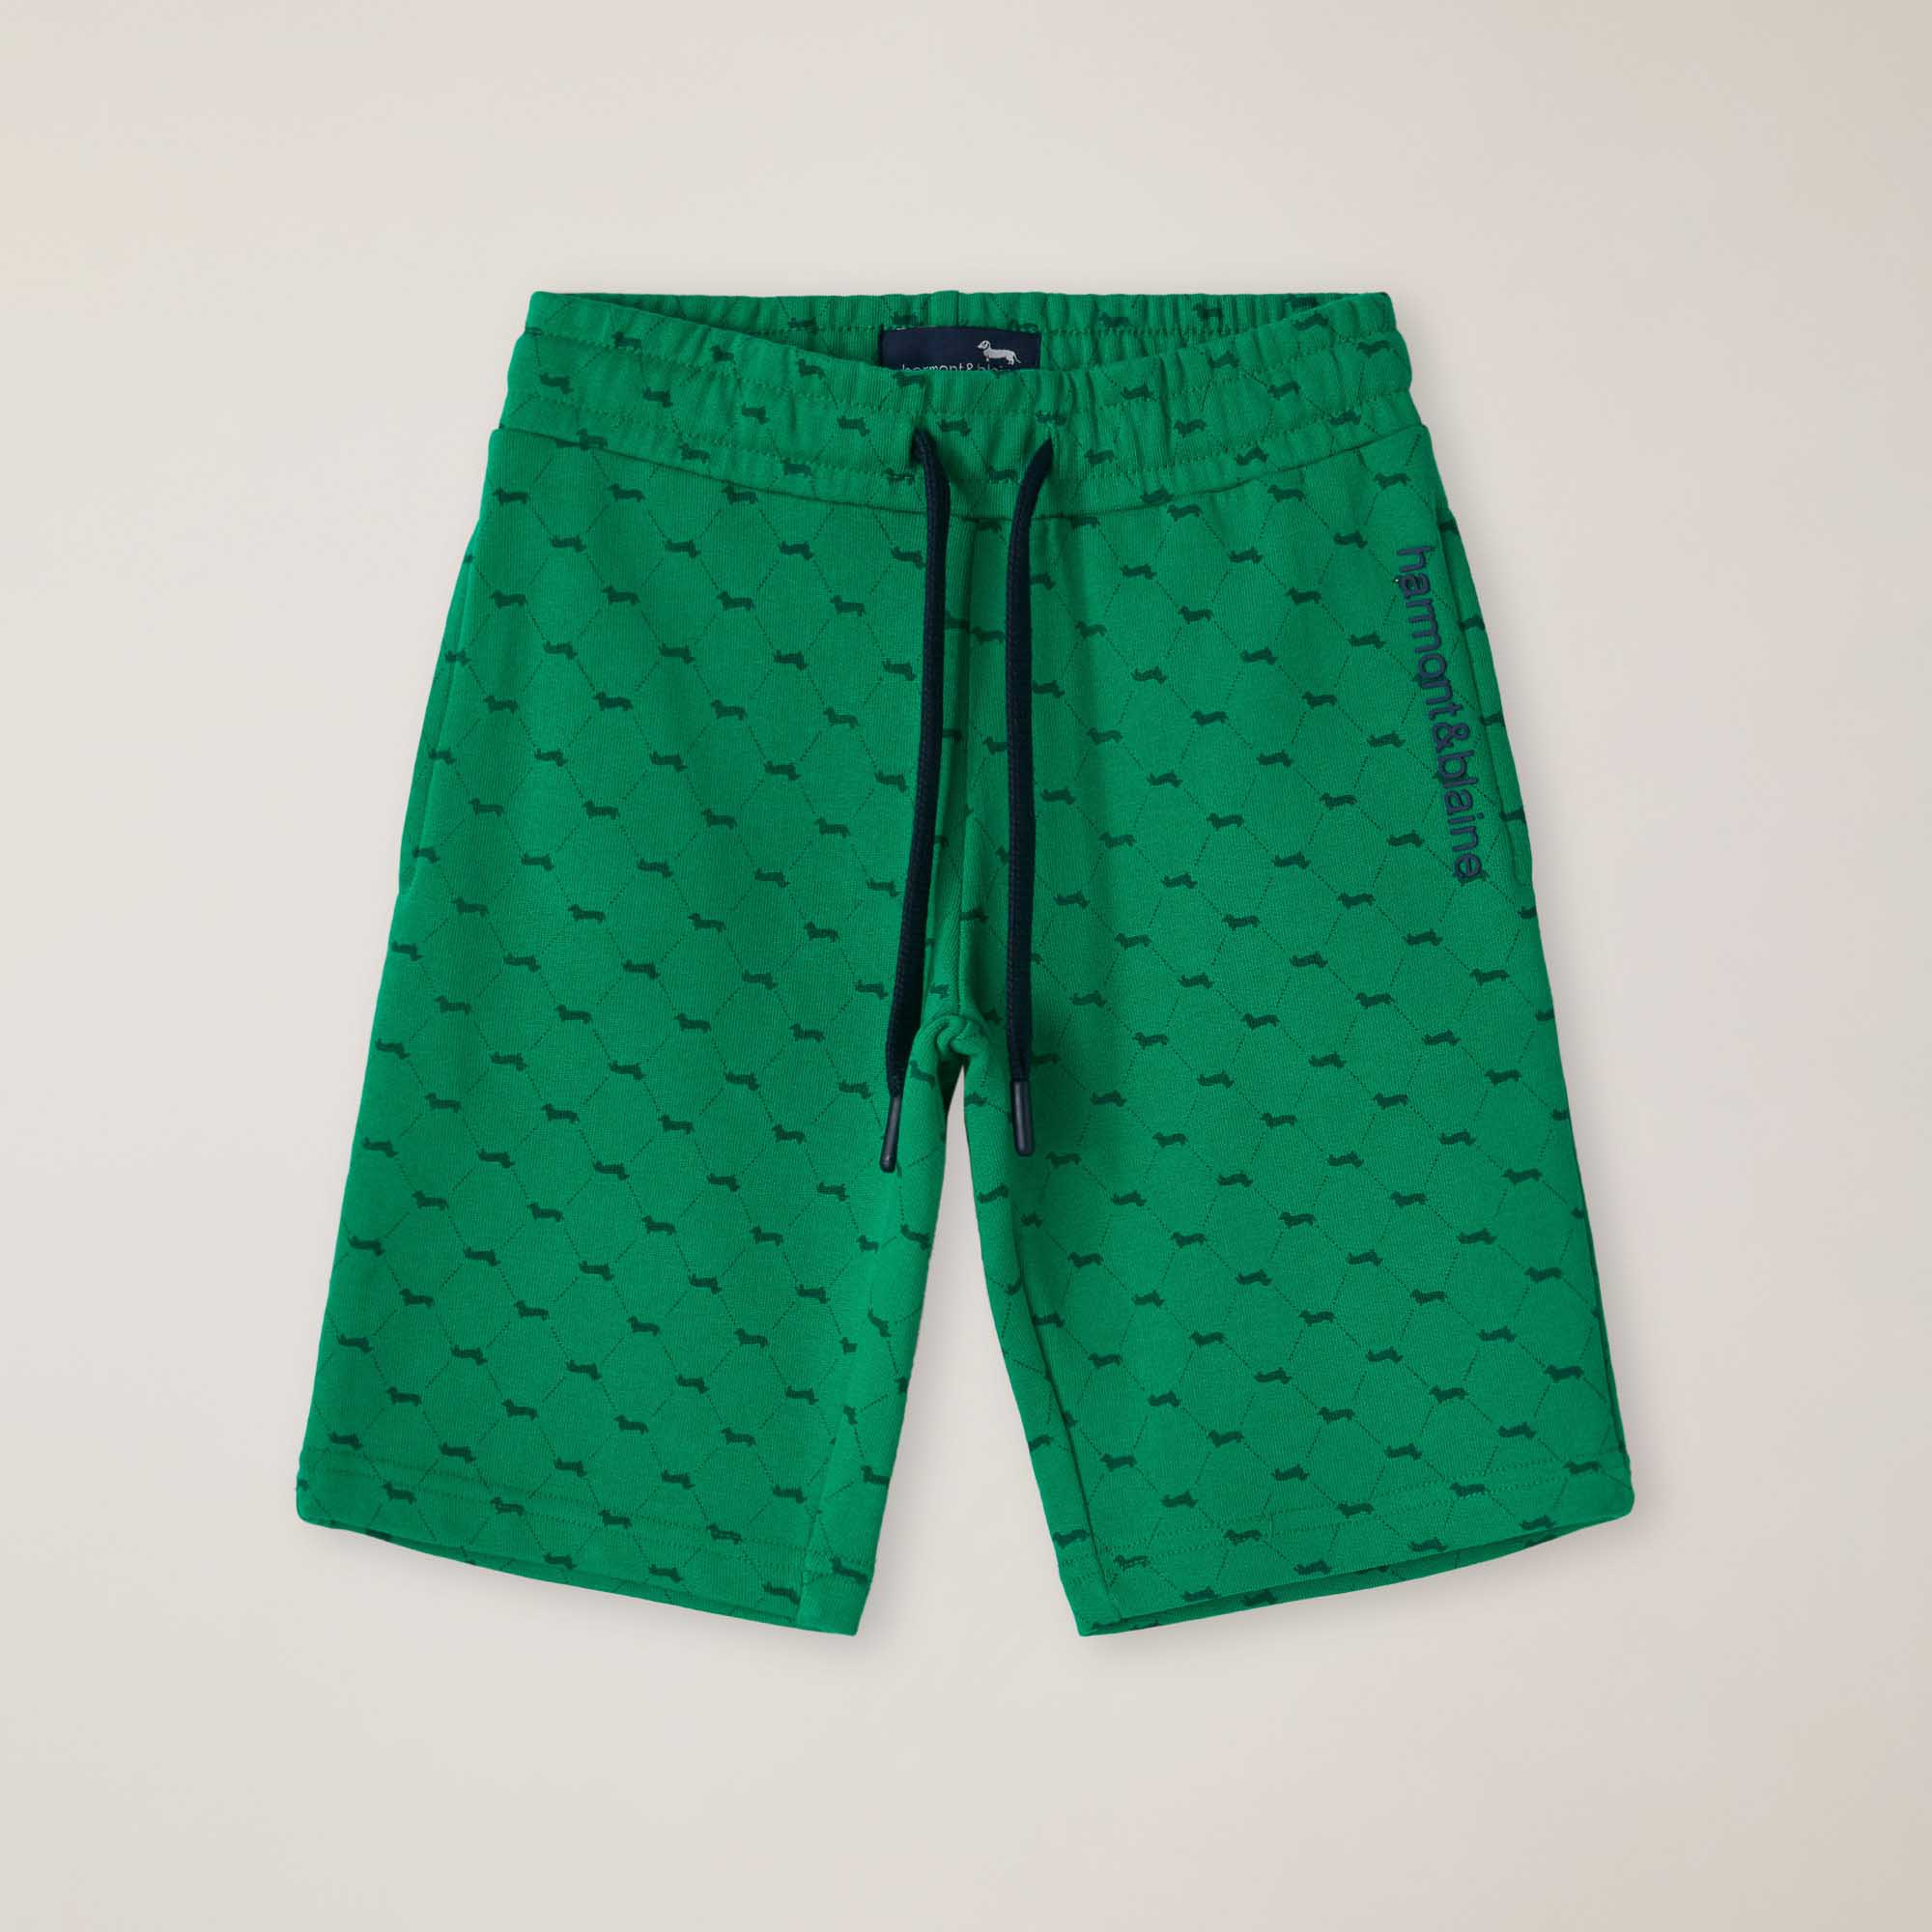 Branded terry French Bermuda shorts